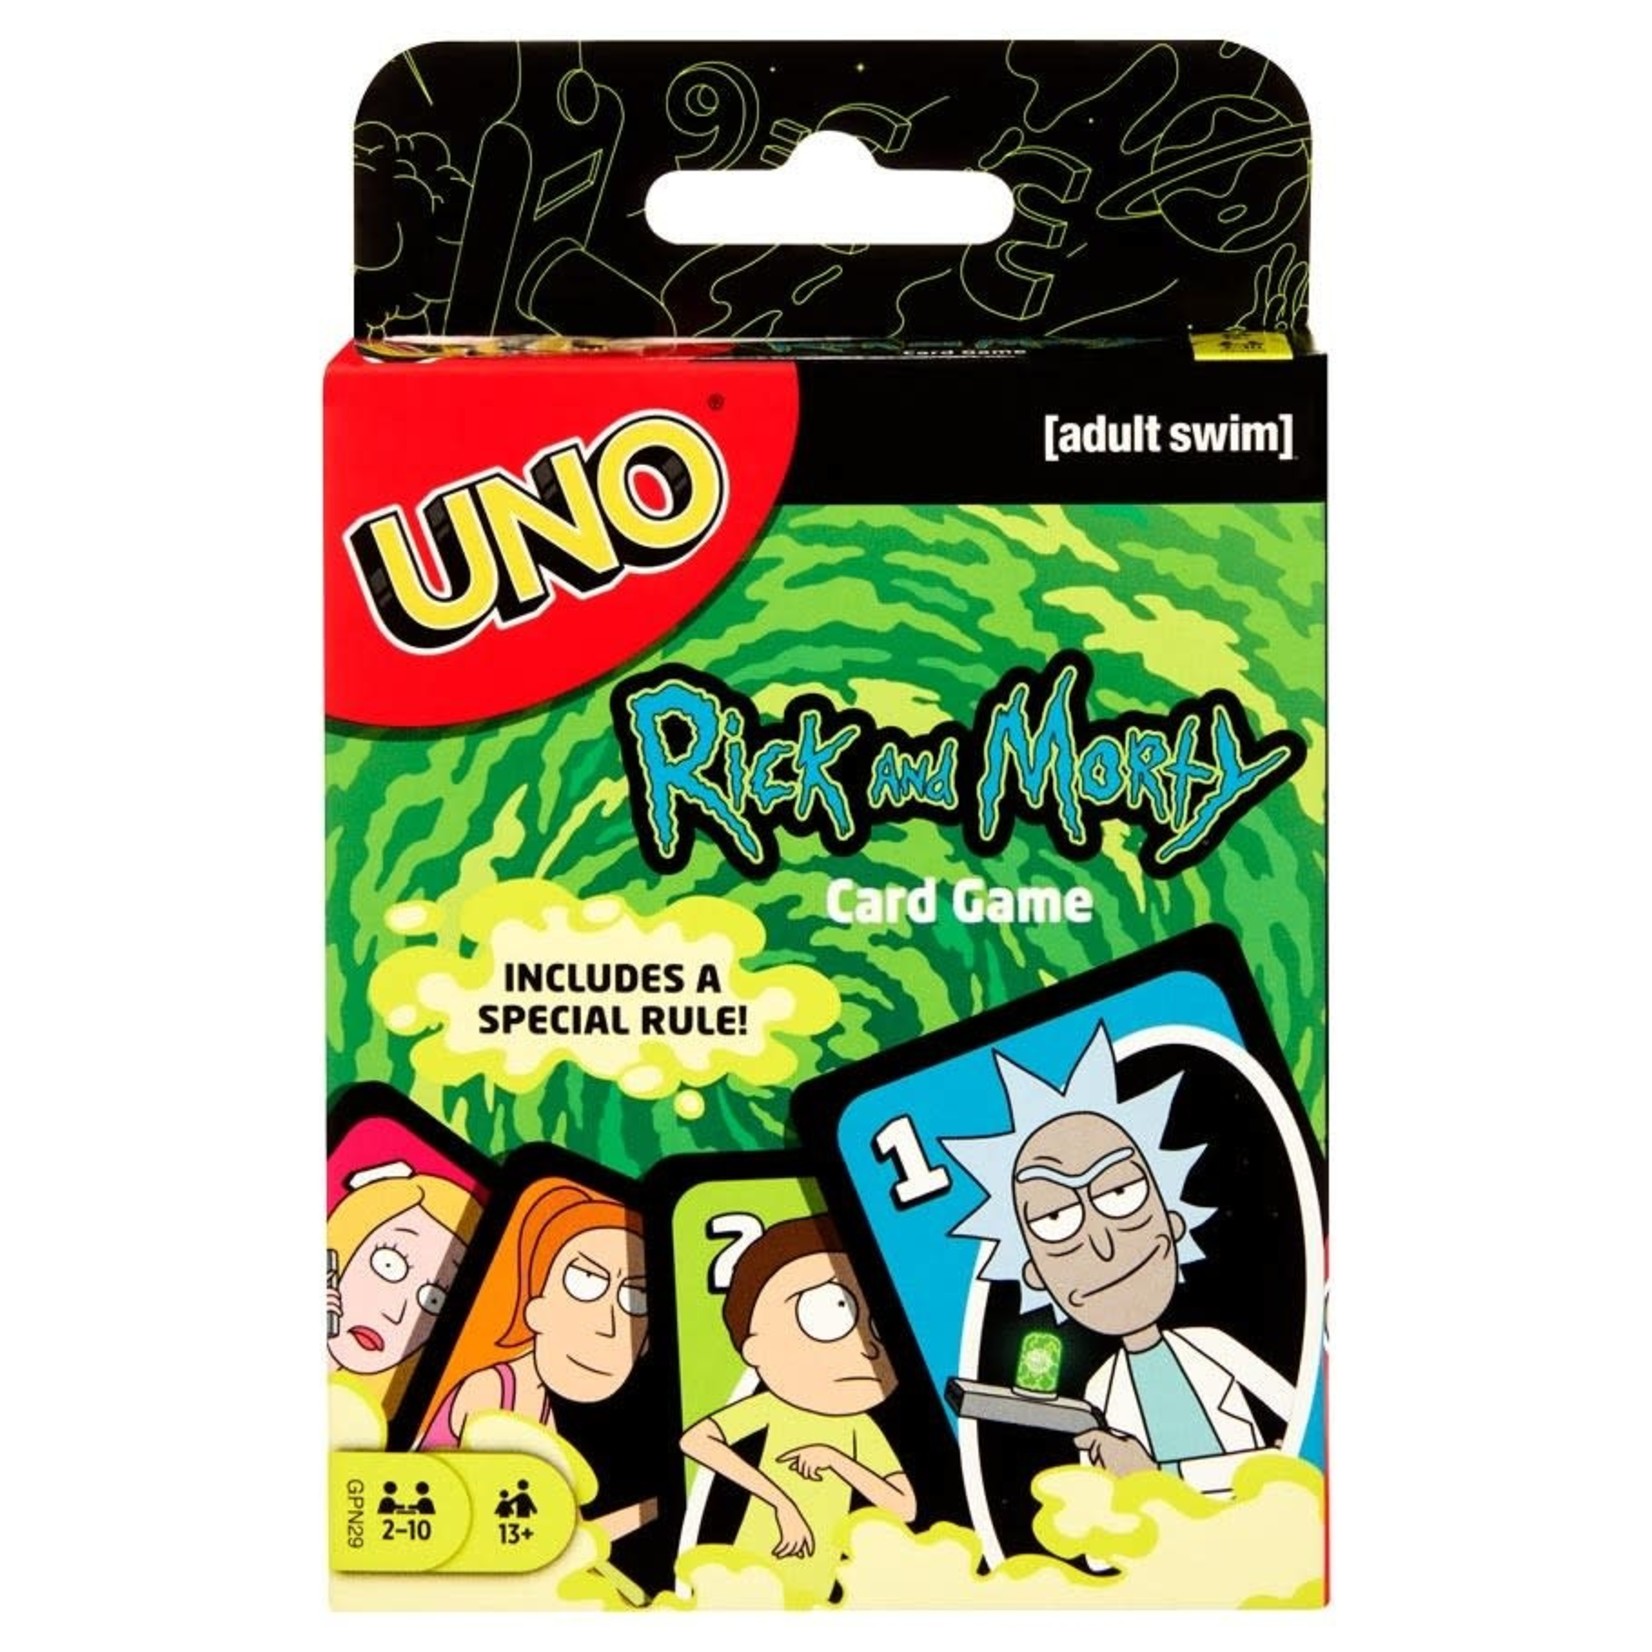 UNO: Rick and Morty